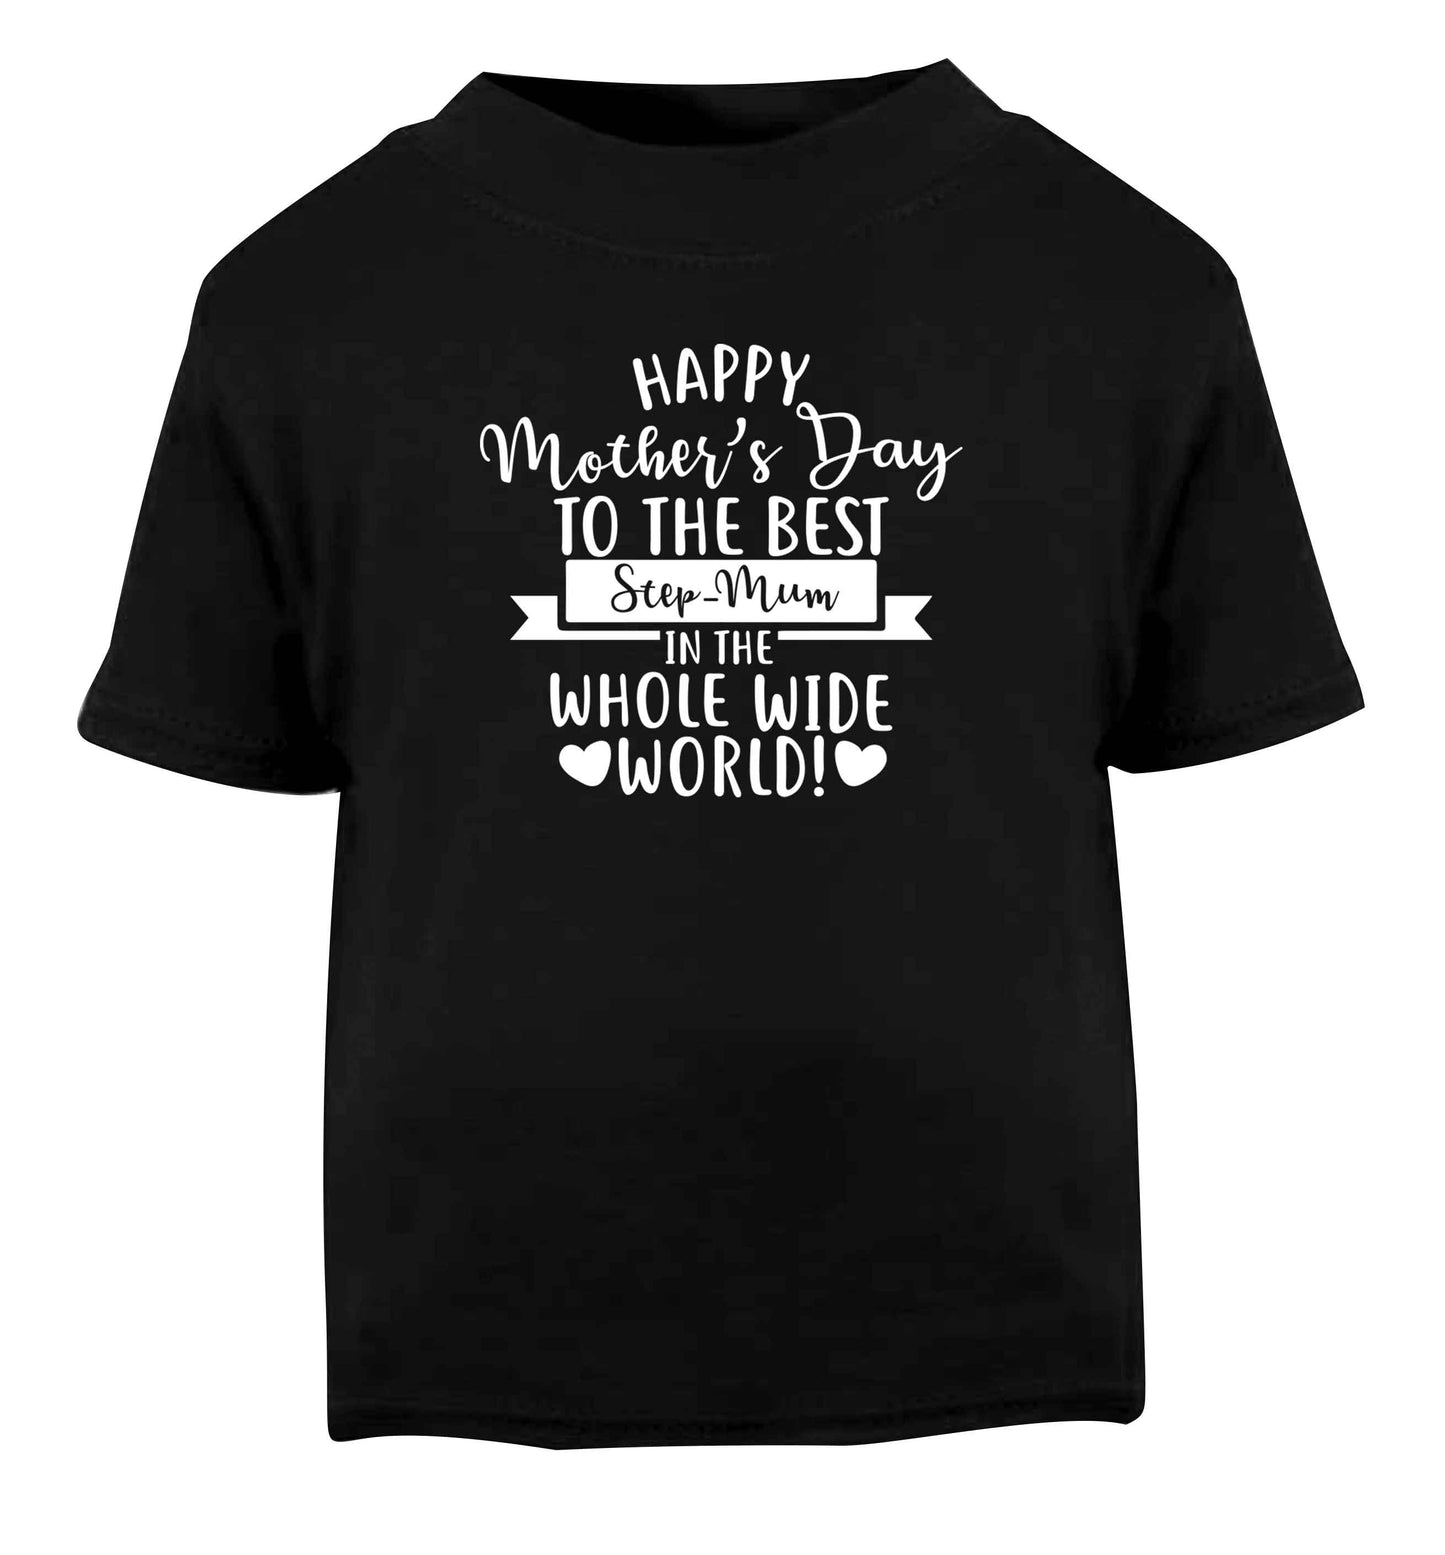 Happy mother's day to the best step-mum in the world Black baby toddler Tshirt 2 years